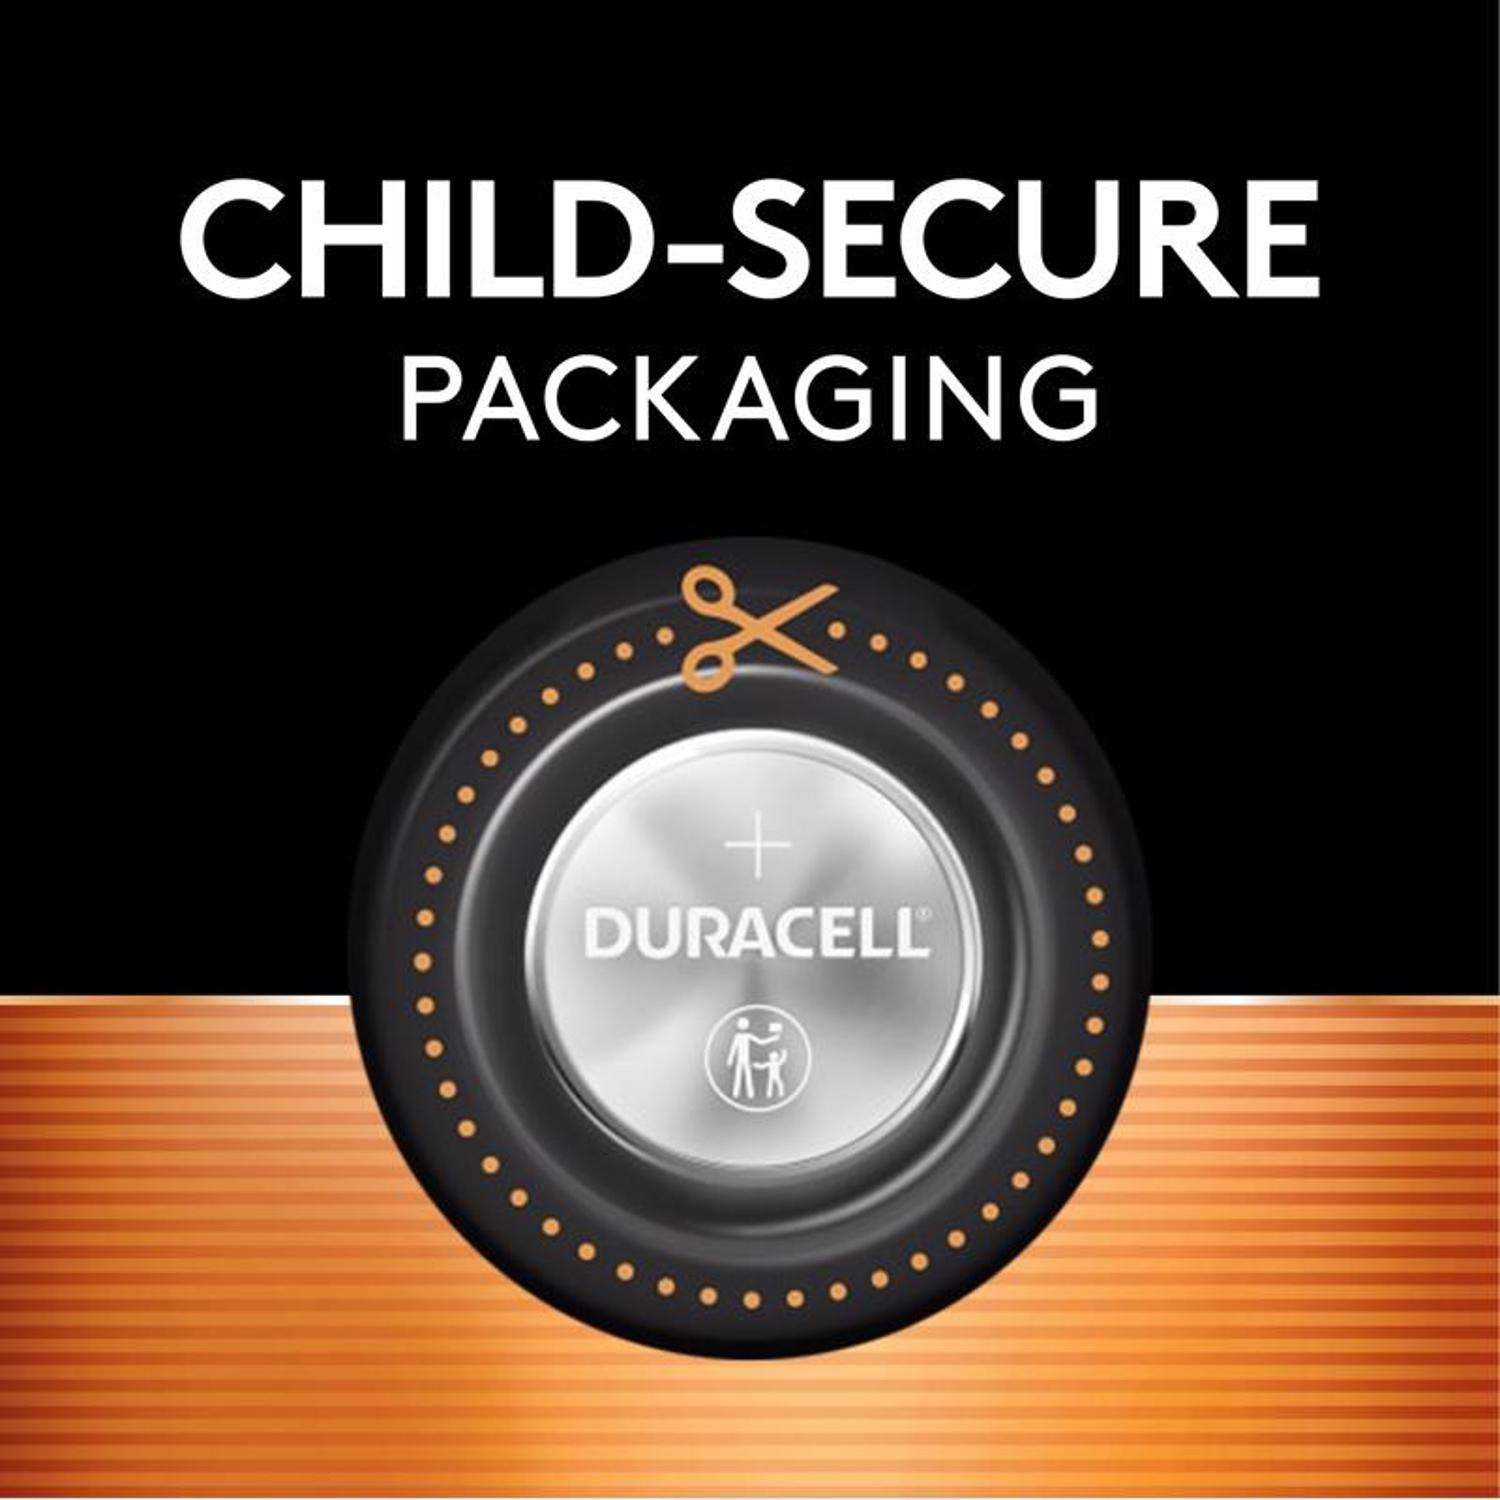 Duracell 3 Volt Lithium 1632 Coin Button Battery Pack of 1